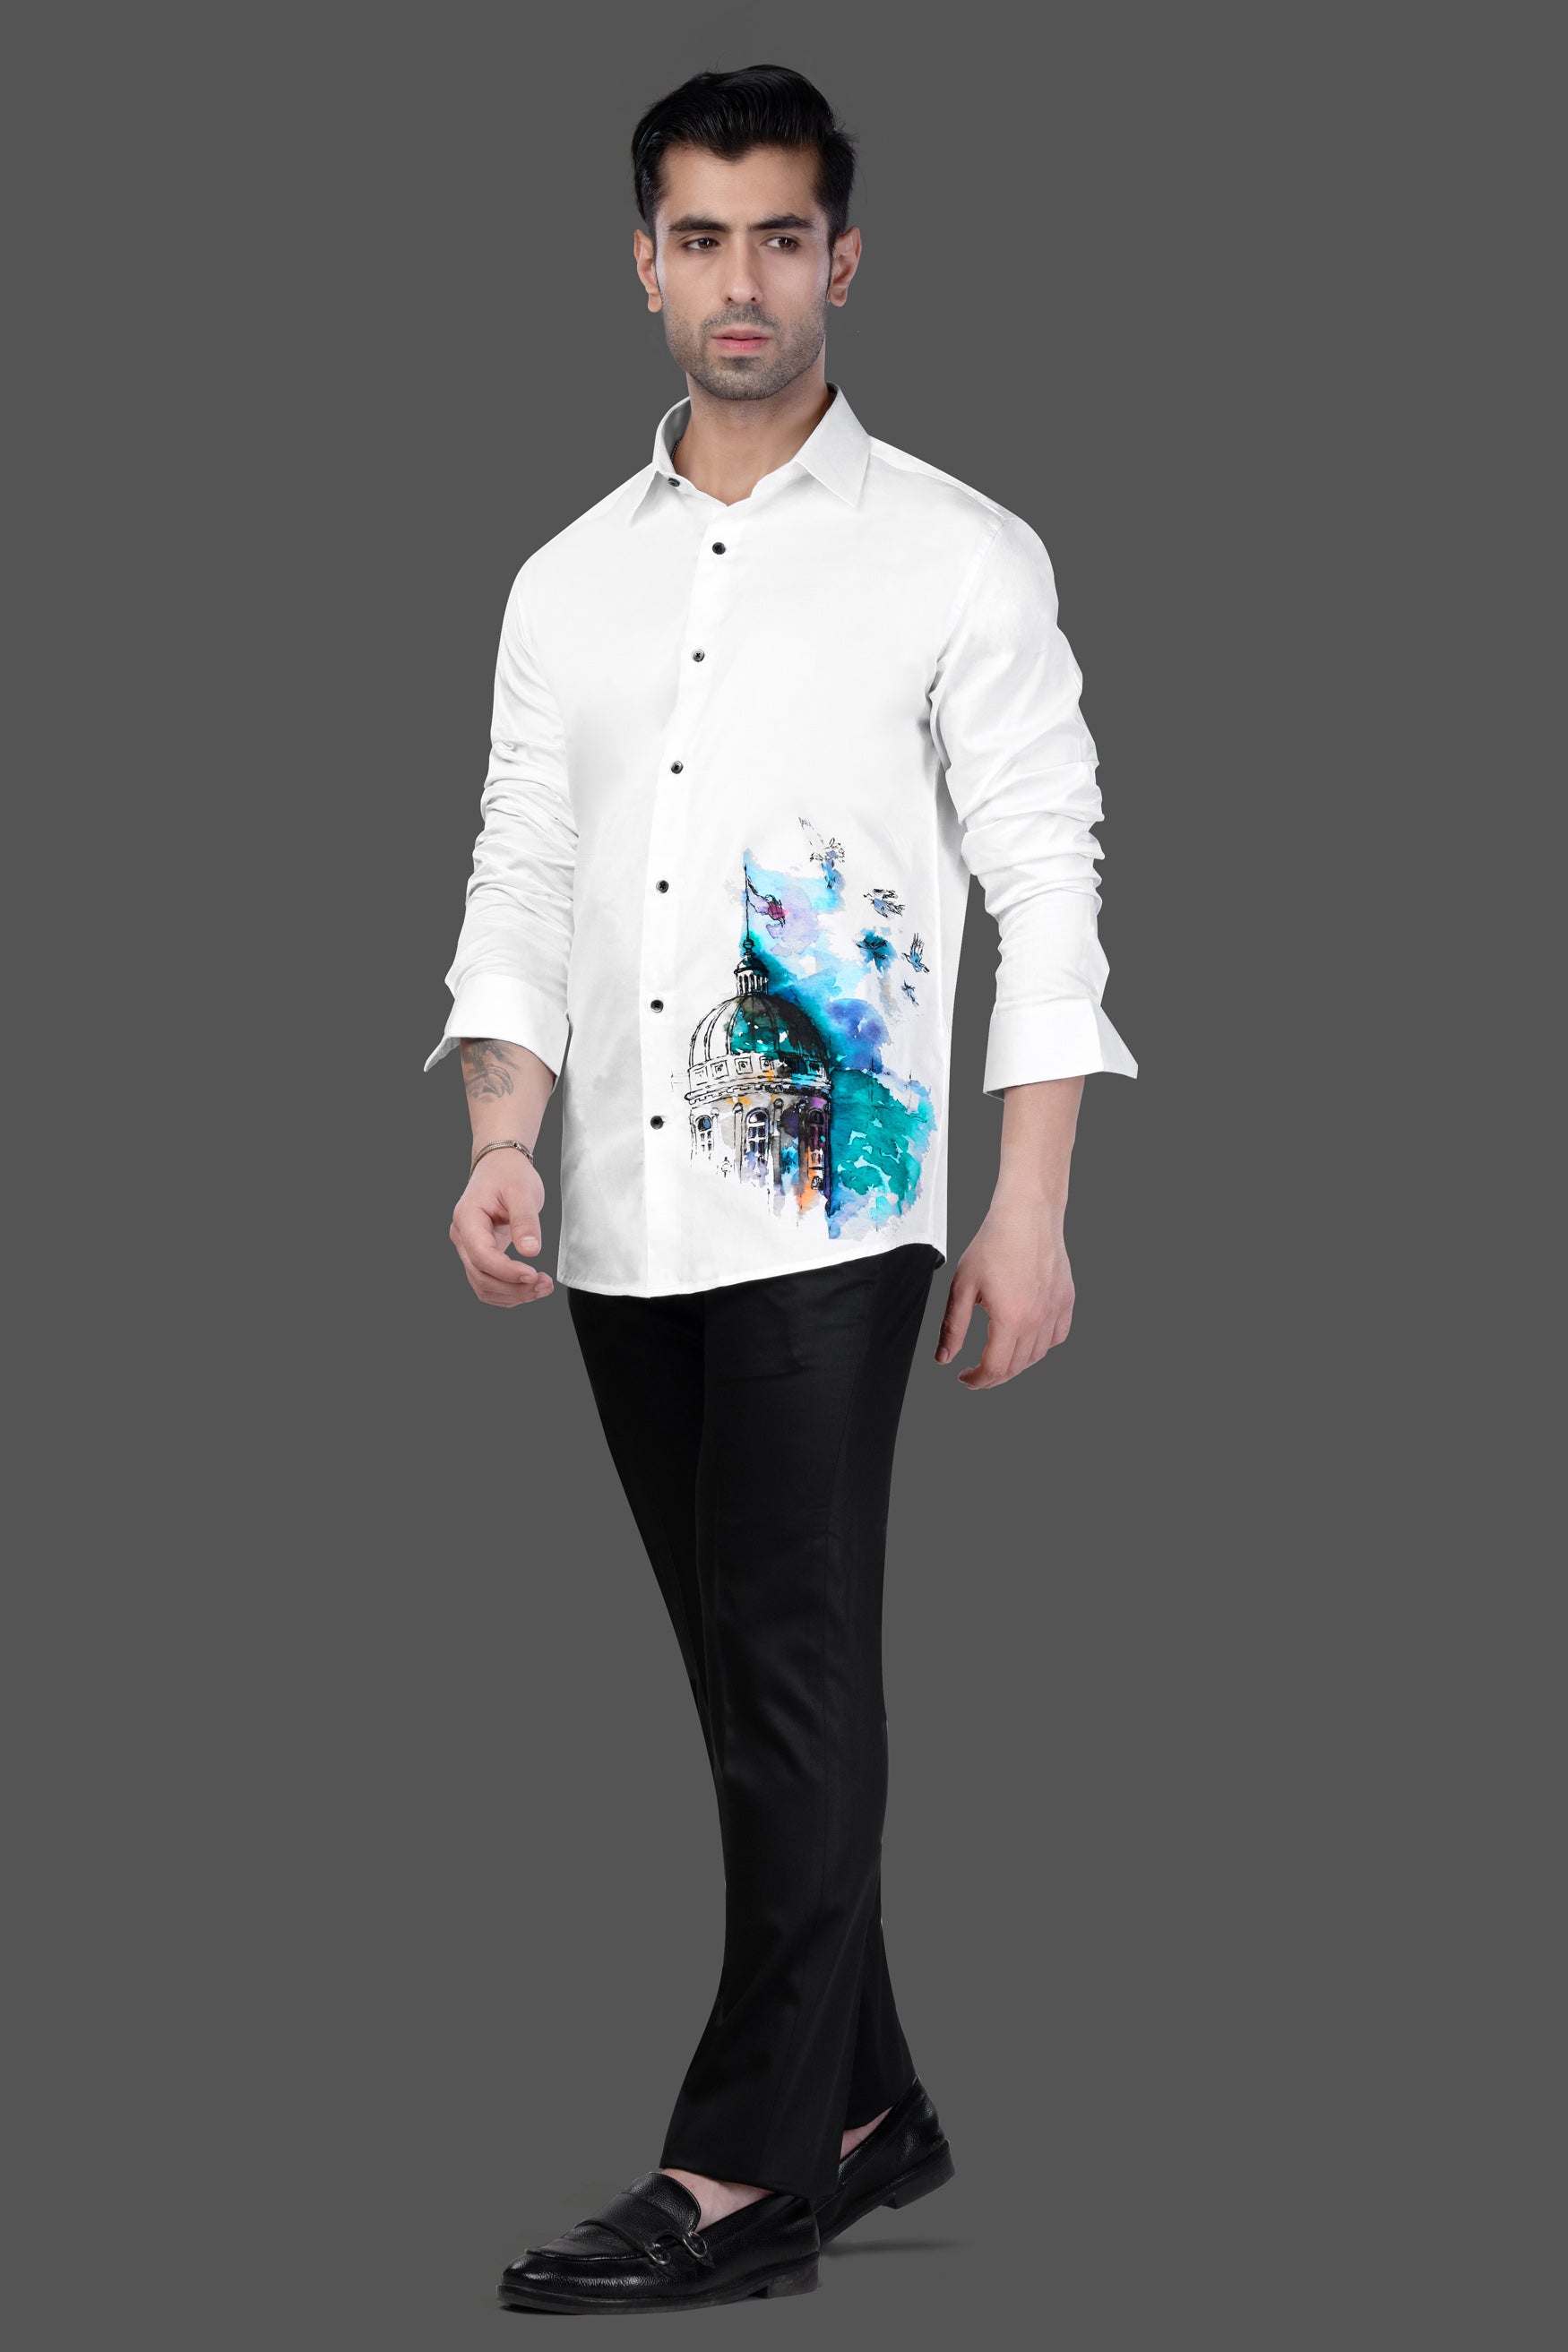  Bright White Abstract Hand Painted Effect Printed Subtle Sheen Super Soft Premium Cotton Designer Shirt 12175-NP-BLK-38, 12175-NP-BLK-H-38, 12175-NP-BLK-39, 12175-NP-BLK-H-39, 12175-NP-BLK-40, 12175-NP-BLK-H-40, 12175-NP-BLK-42, 12175-NP-BLK-H-42, 12175-NP-BLK-44, 12175-NP-BLK-H-44, 12175-NP-BLK-46, 12175-NP-BLK-H-46, 12175-NP-BLK-48, 12175-NP-BLK-H-48, 12175-NP-BLK-50, 12175-NP-BLK-H-50, 12175-NP-BLK-52, 12175-NP-BLK-H-52